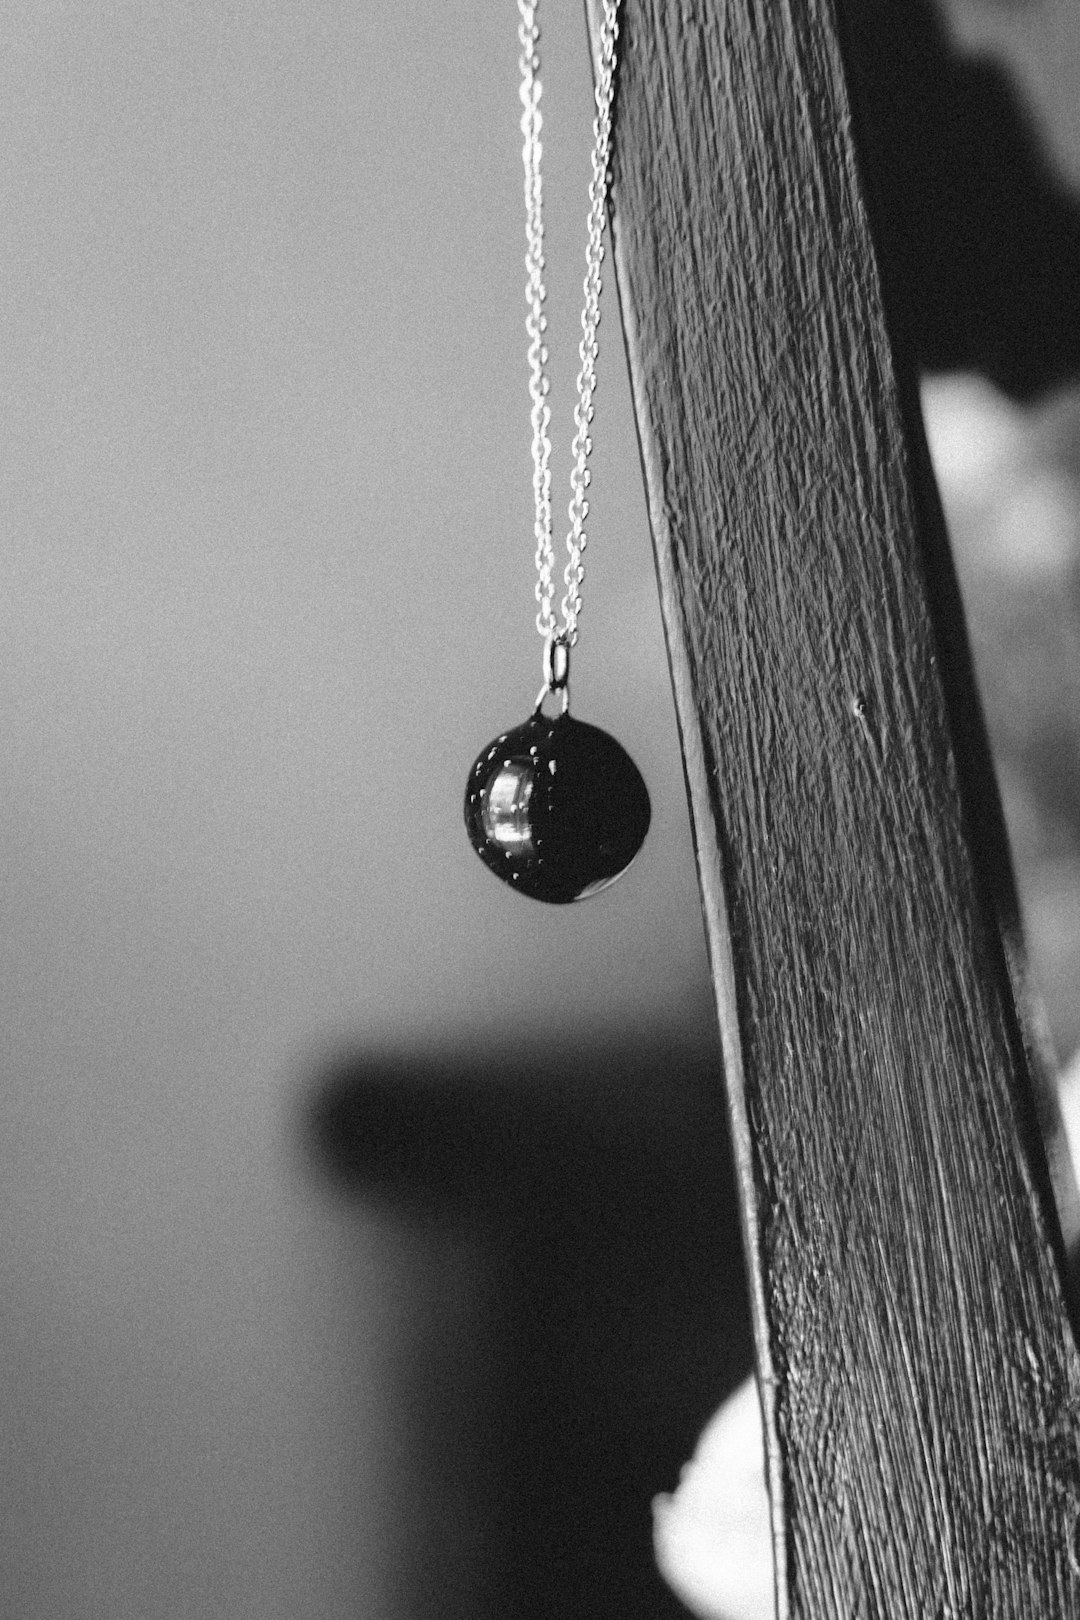 silver heart pendant necklace in grayscale photography